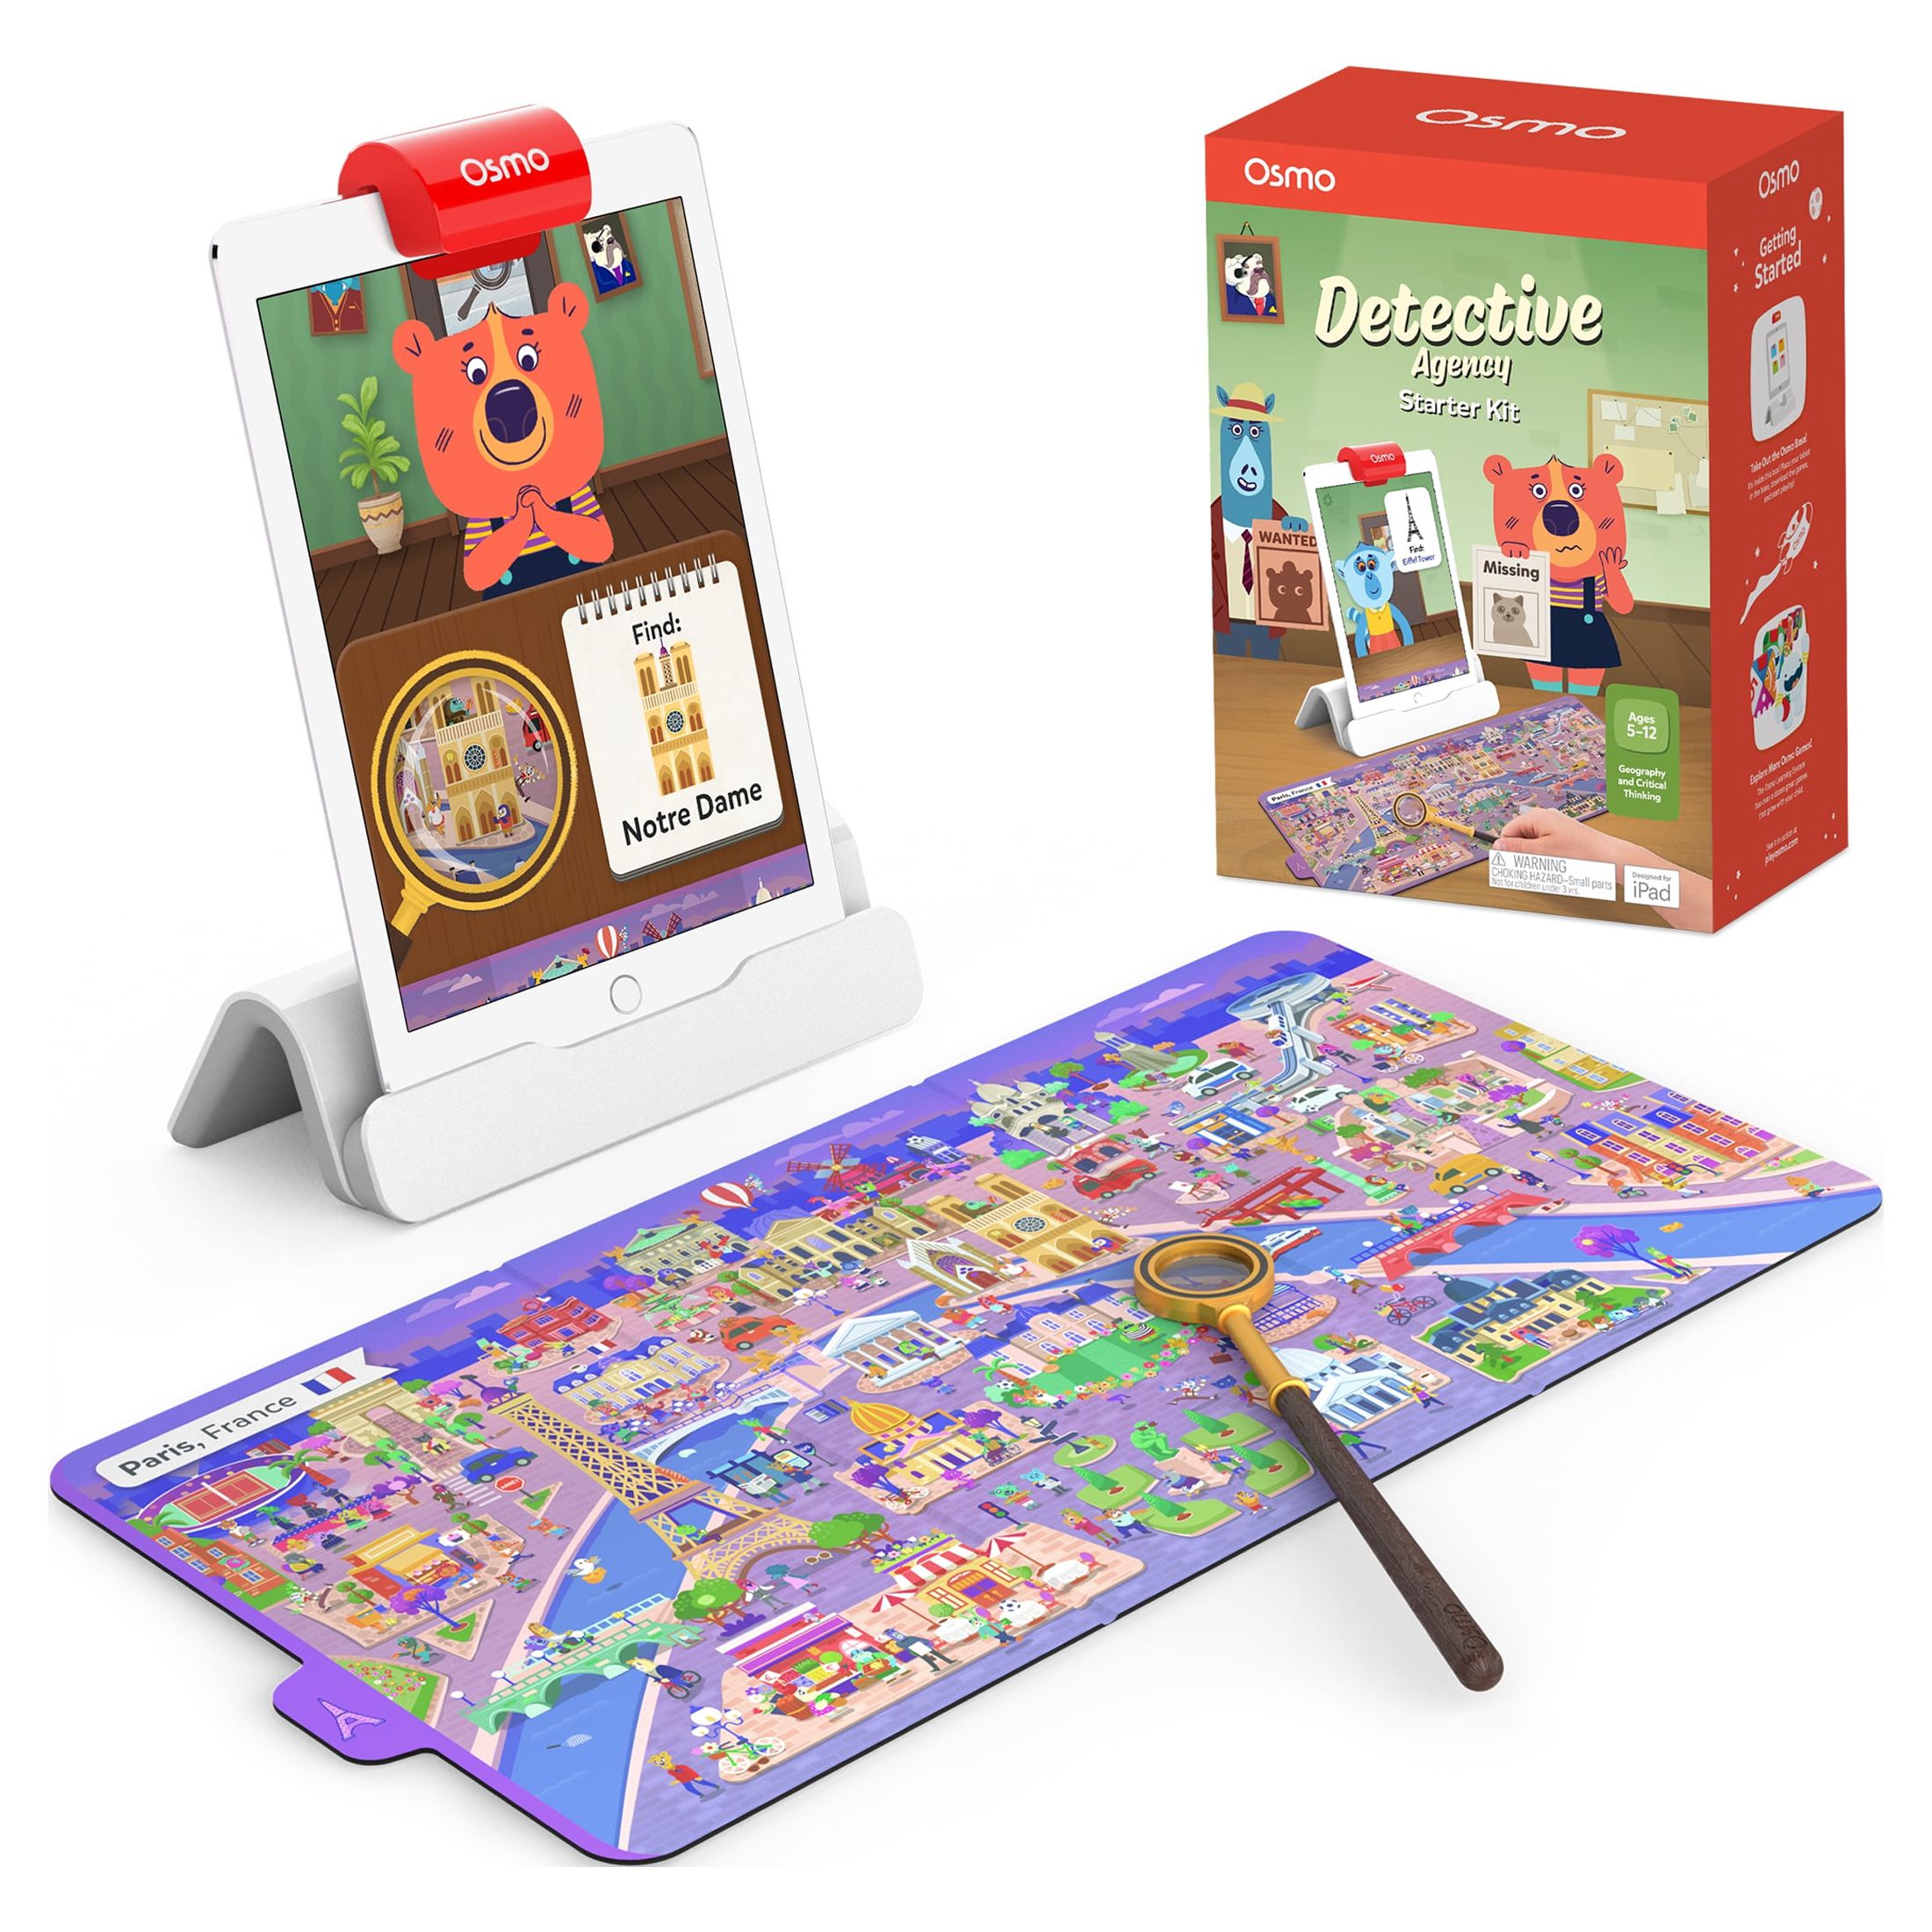 Osmo - Detective Agency Starter Kit for iPad, Pretend Play, Detective Board Game, Mystery Games, Learning Toys for 5 to 11 Year Olds, Mystery Toys, Detective Toy, Puzzles for Kids, Memory Games, STEM - image 1 of 8